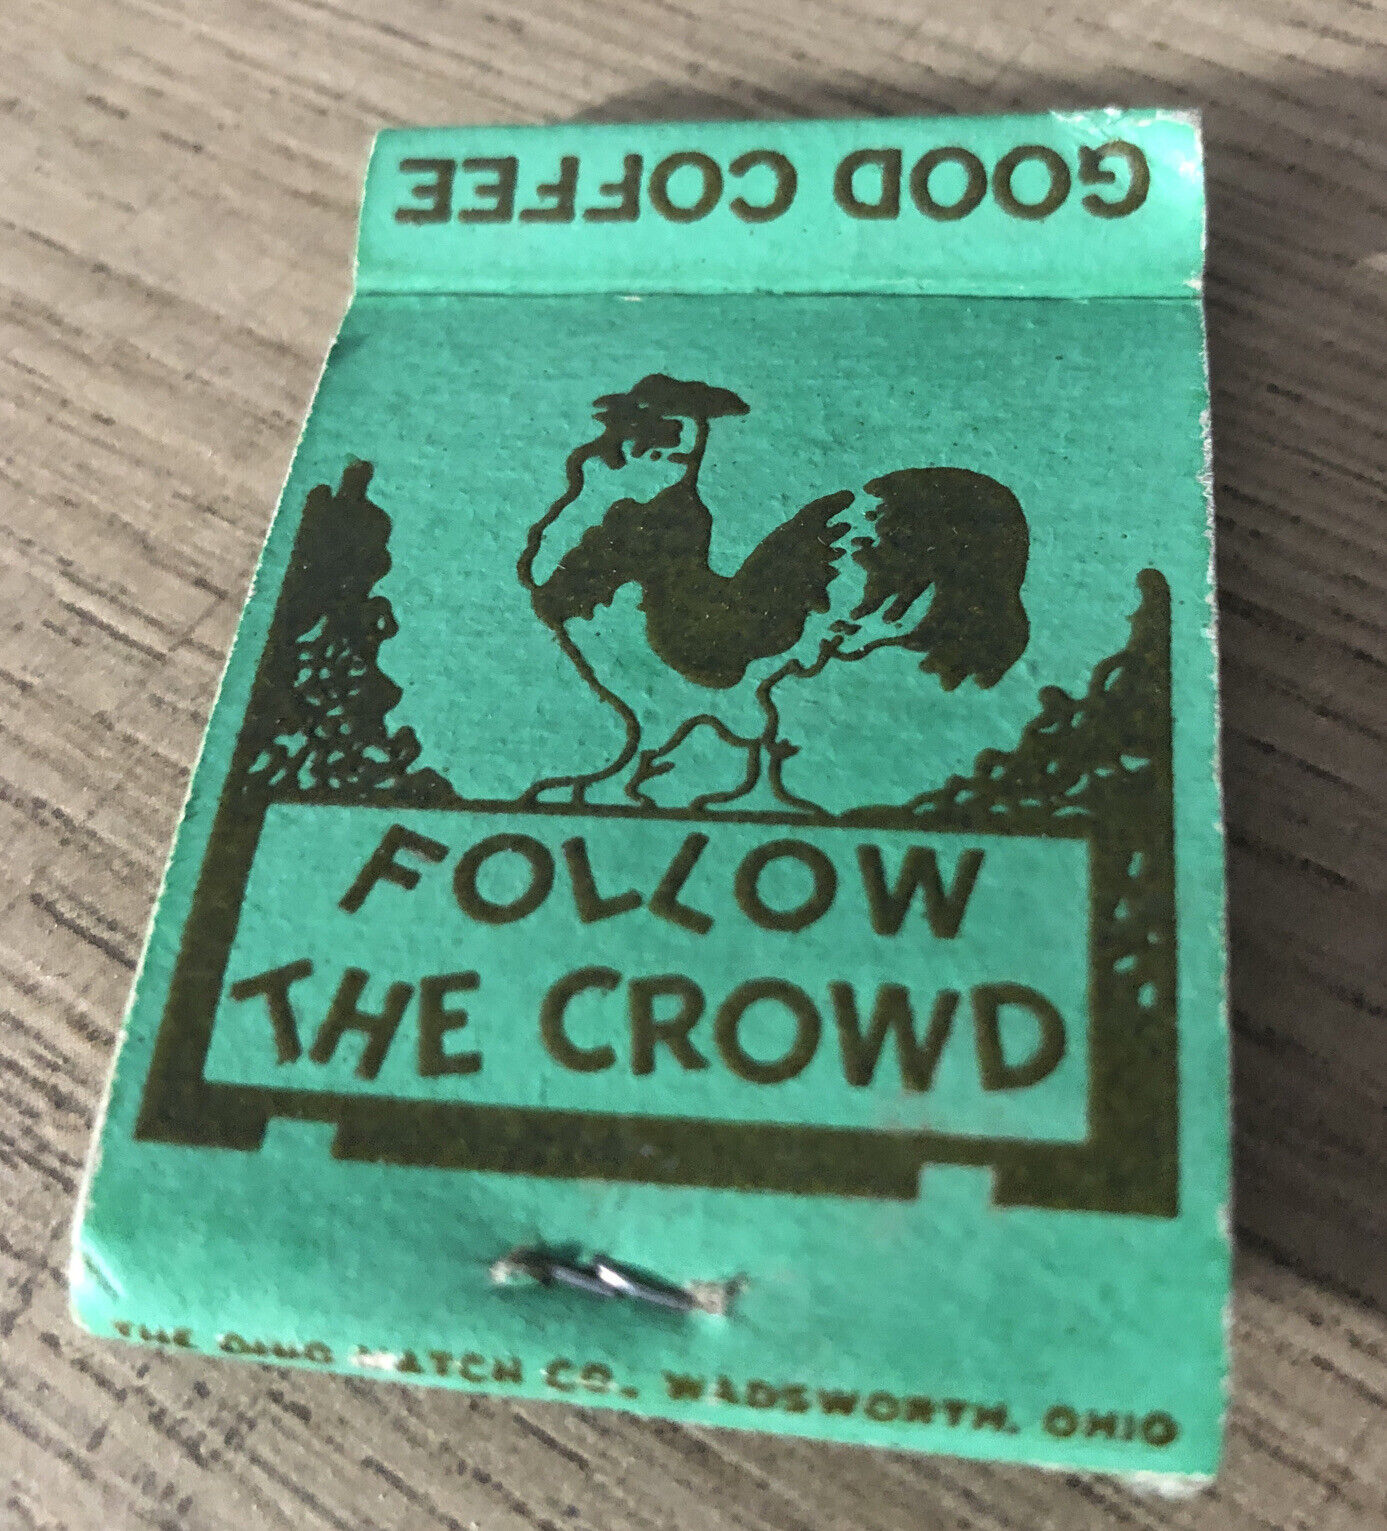 1930s-40s “Follow The Crowd” Matchbook Country Cupboard Coffee Shop Kremmling CO